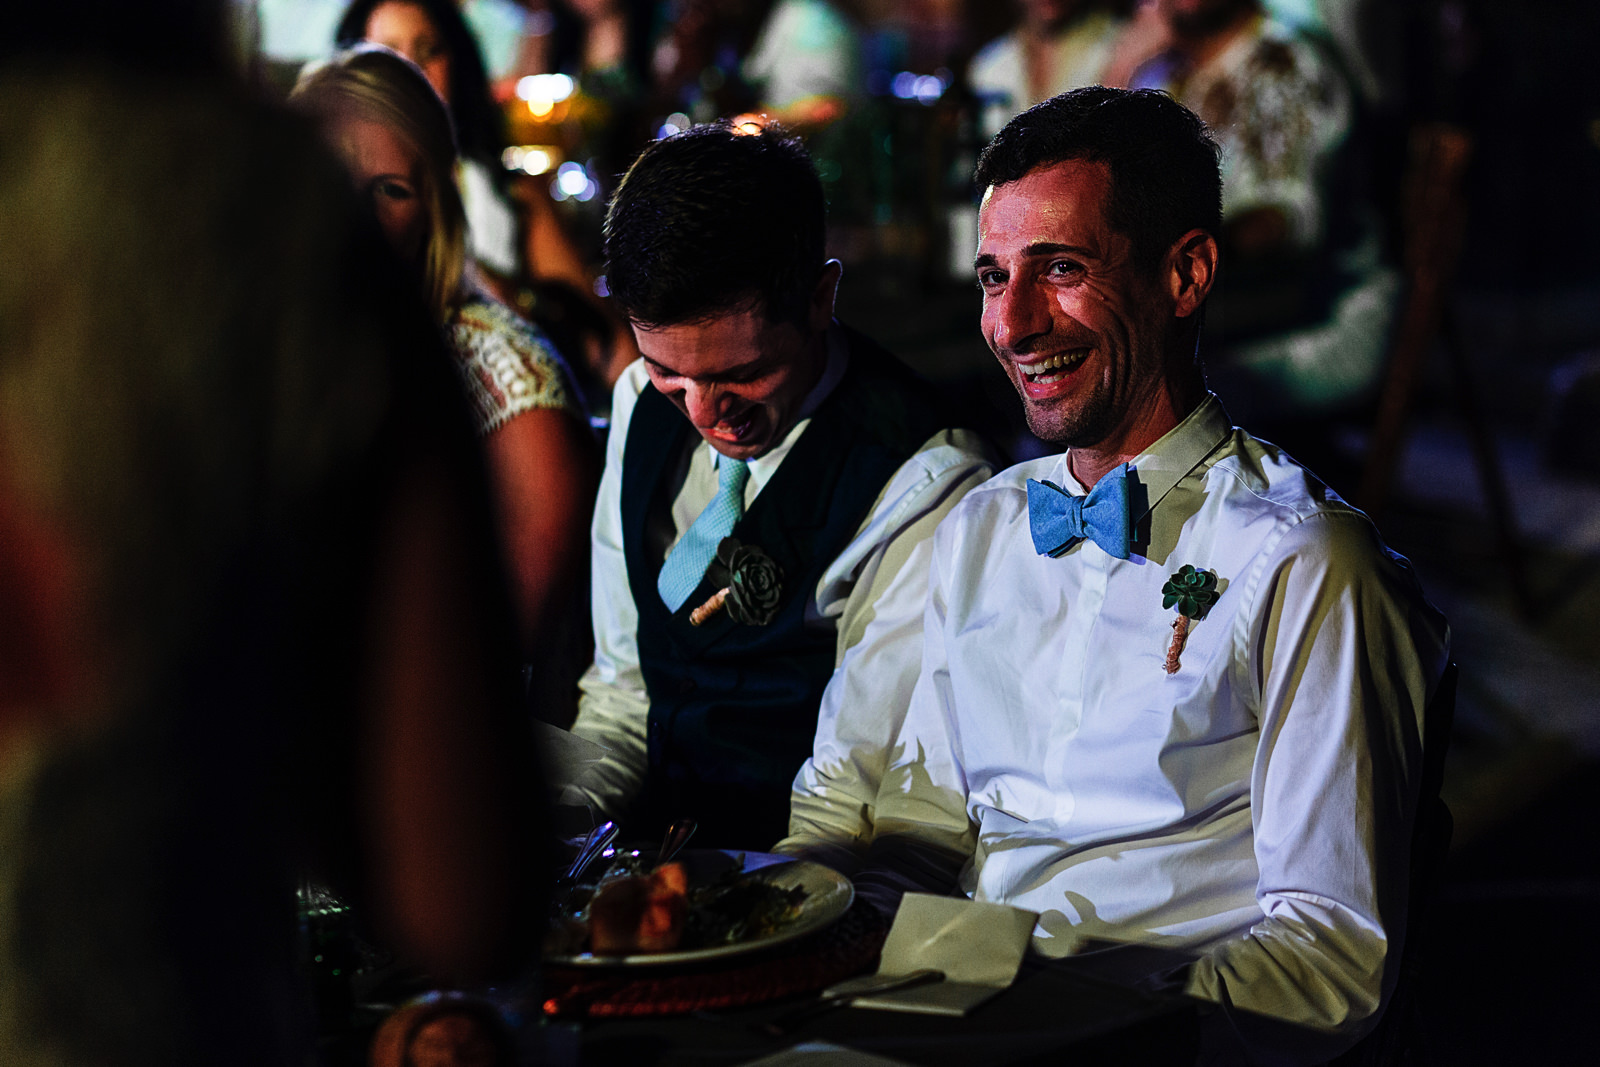 Grooms laugh as reaction while wedding guest is giving a toast speech during the dinner at Casa Karma